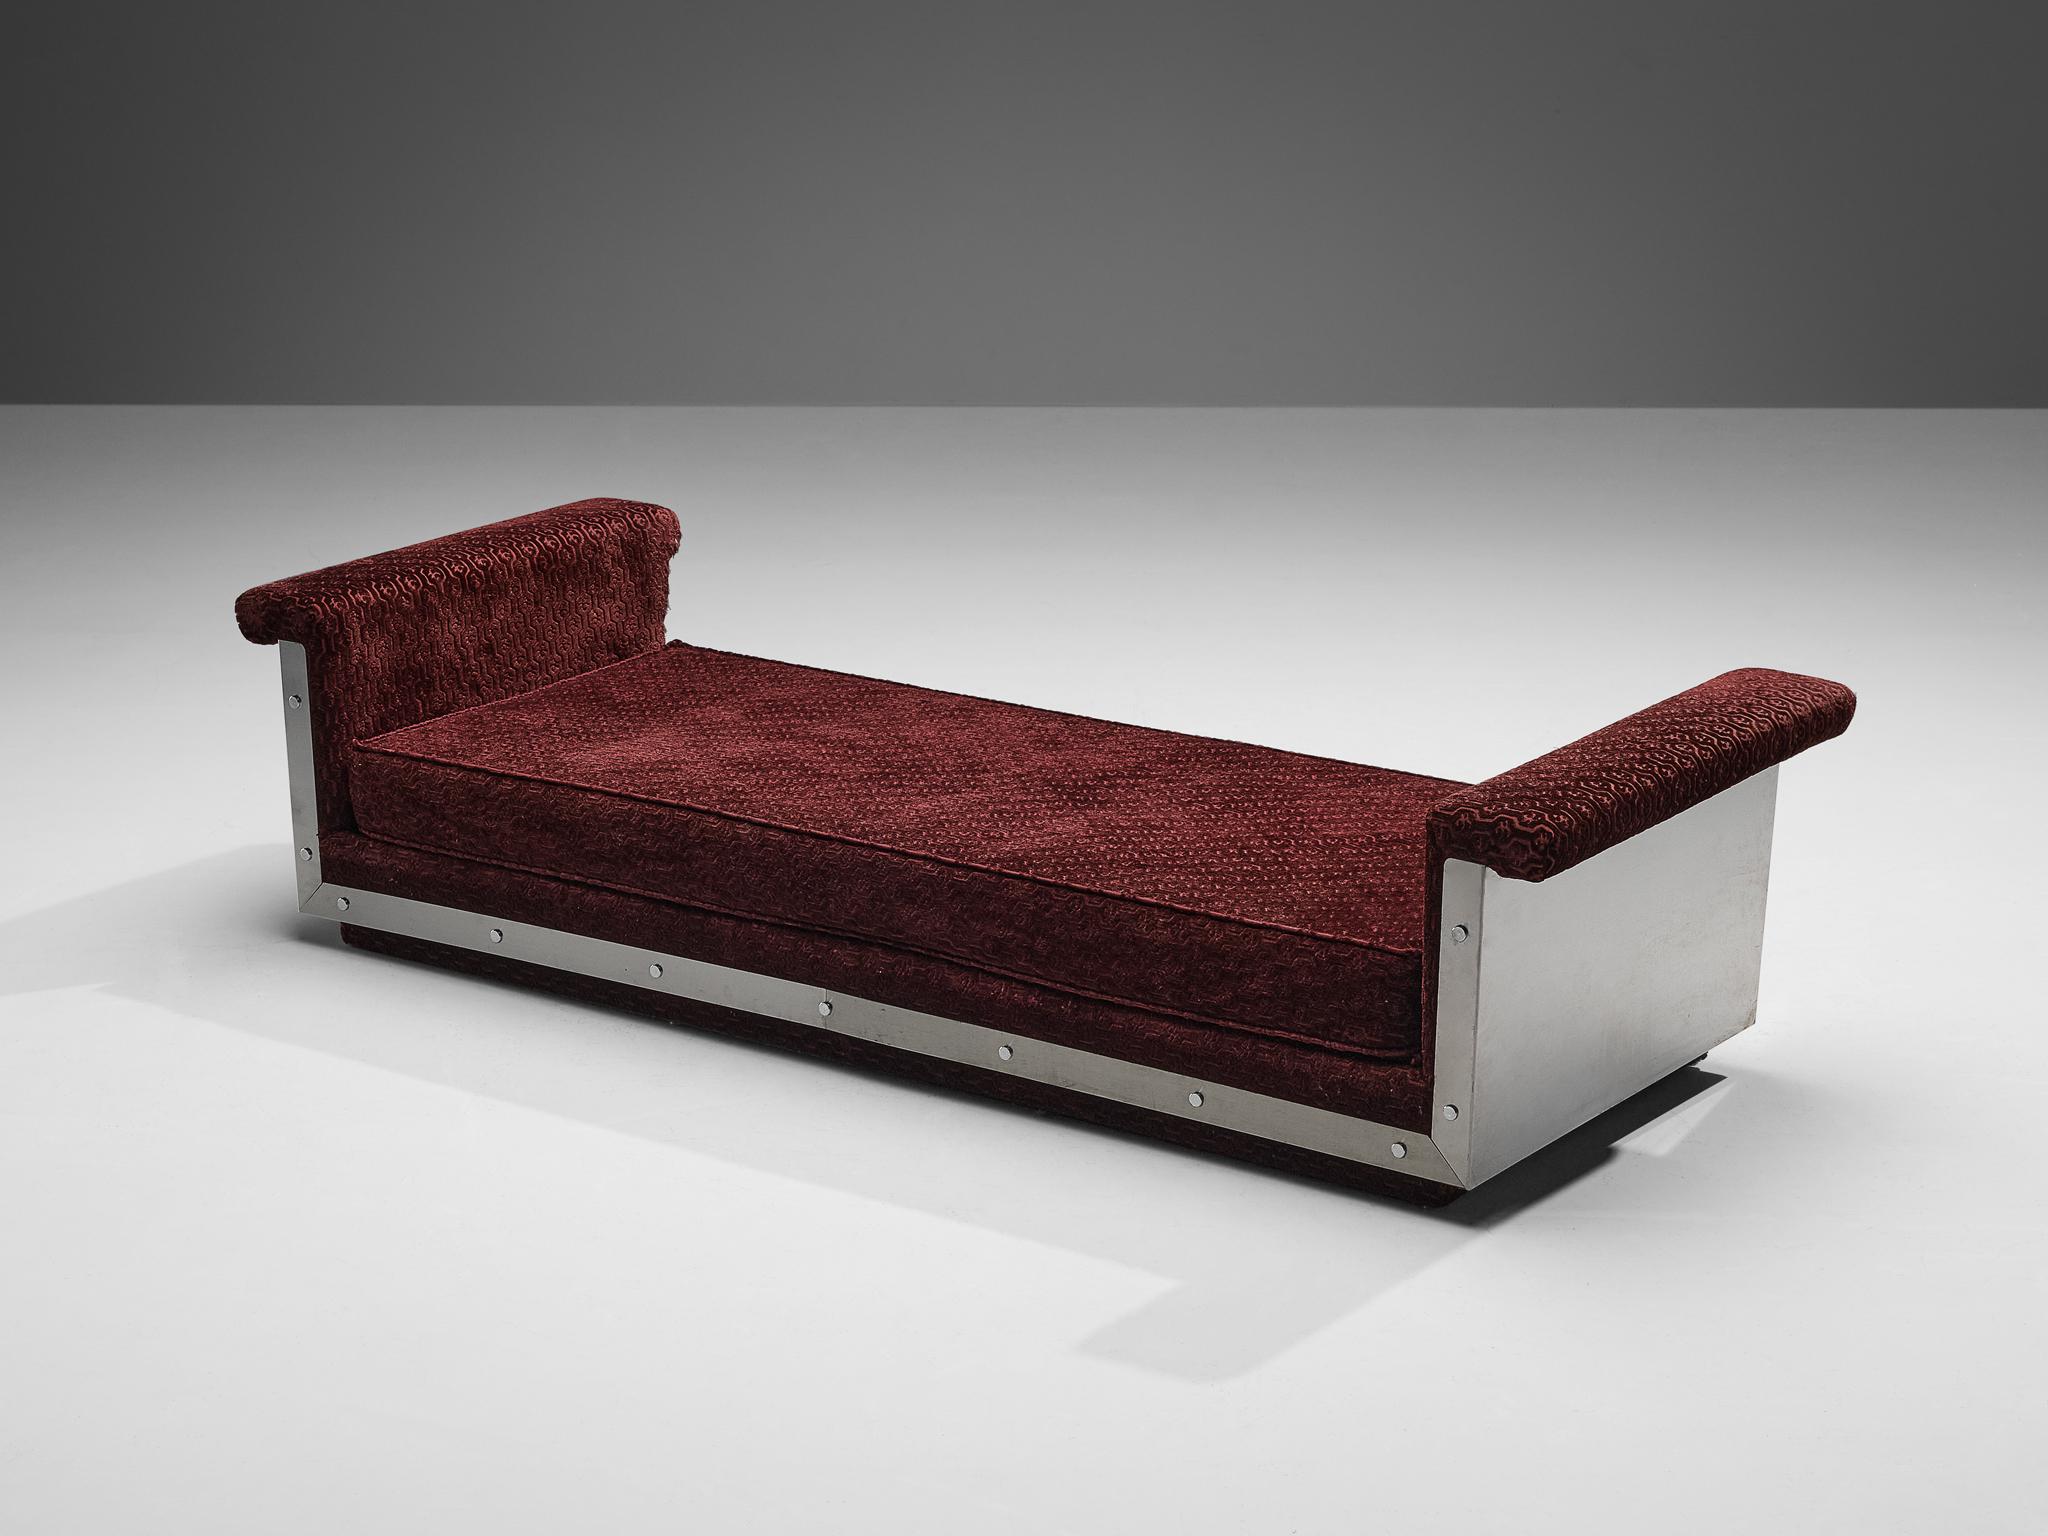 French Daybed in Stainless Steel and Burgundy Velvet Upholstery  1